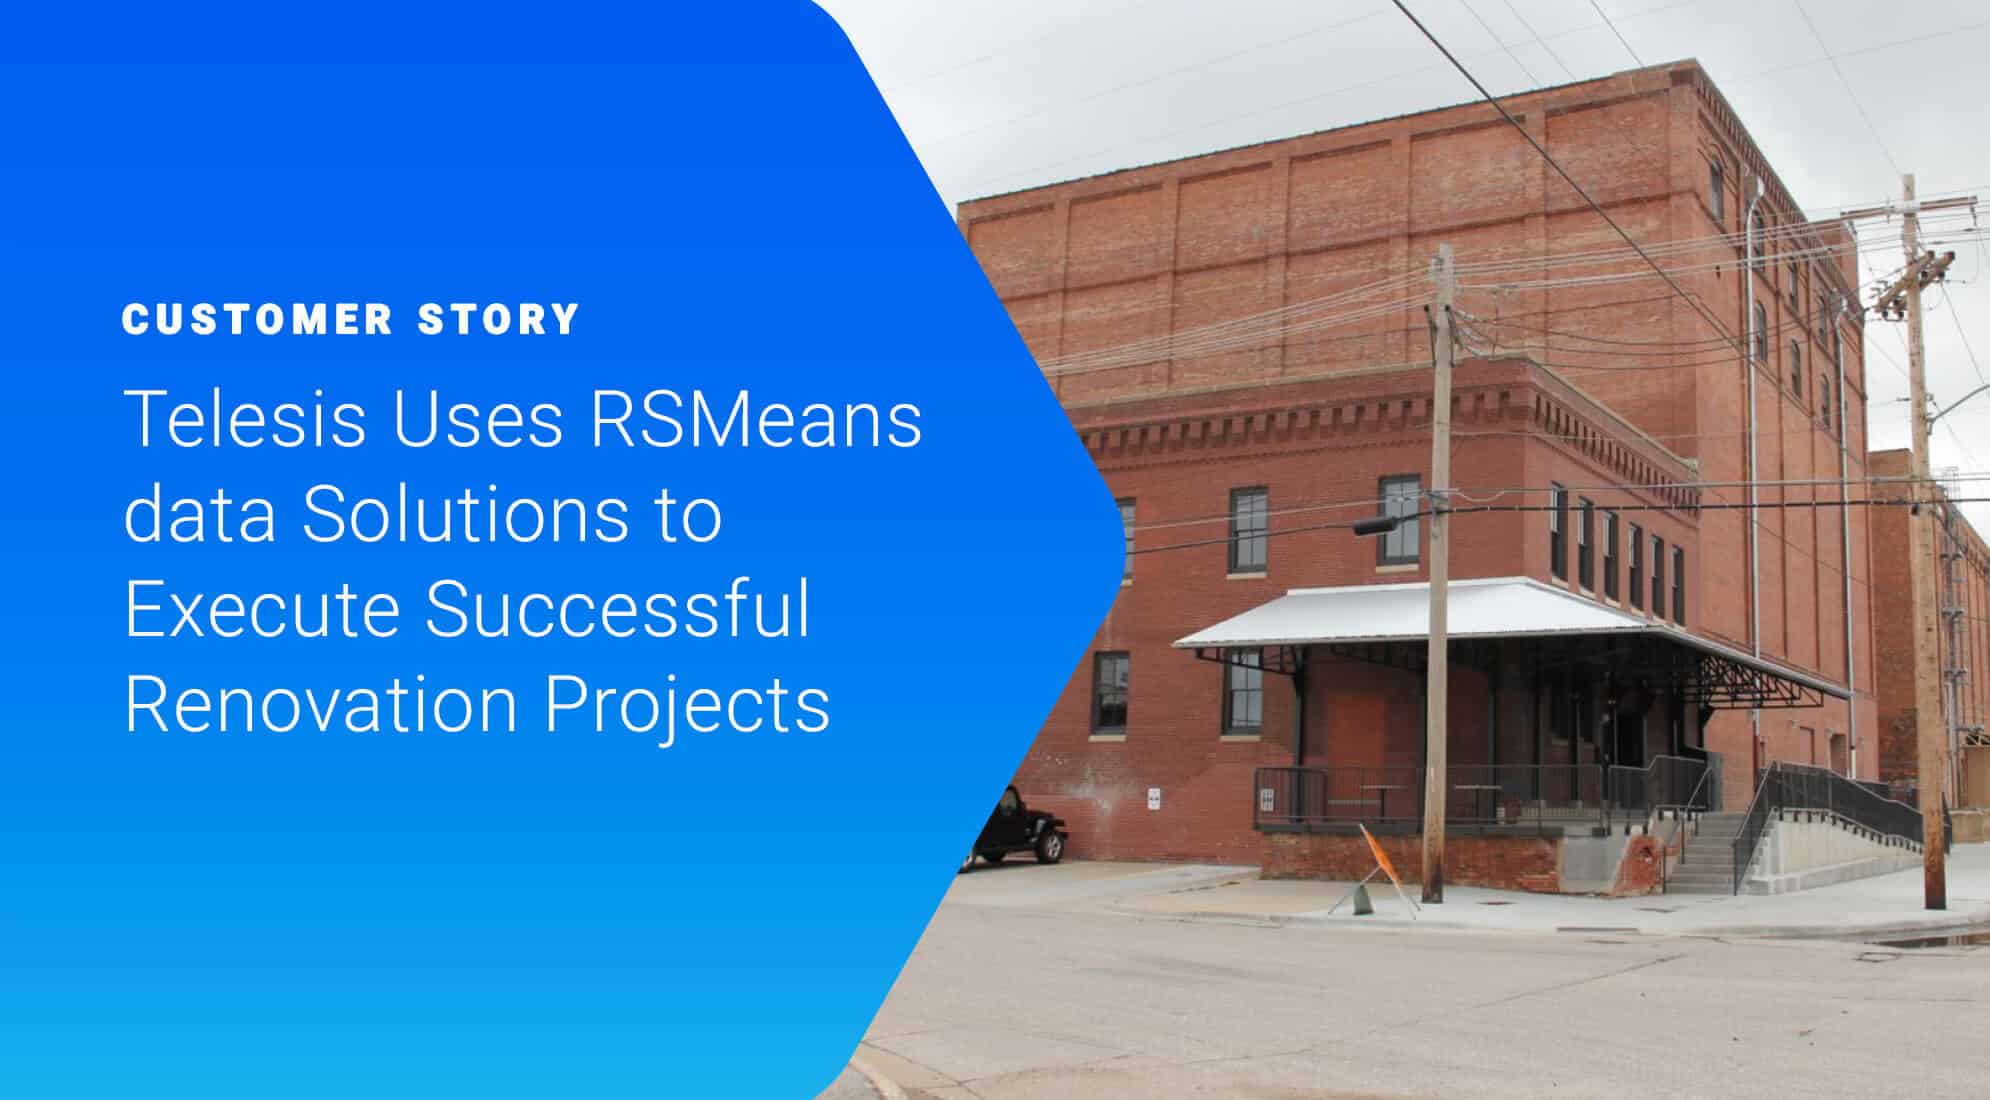 Renovation Projects Made Easier Using RSMeans data 1